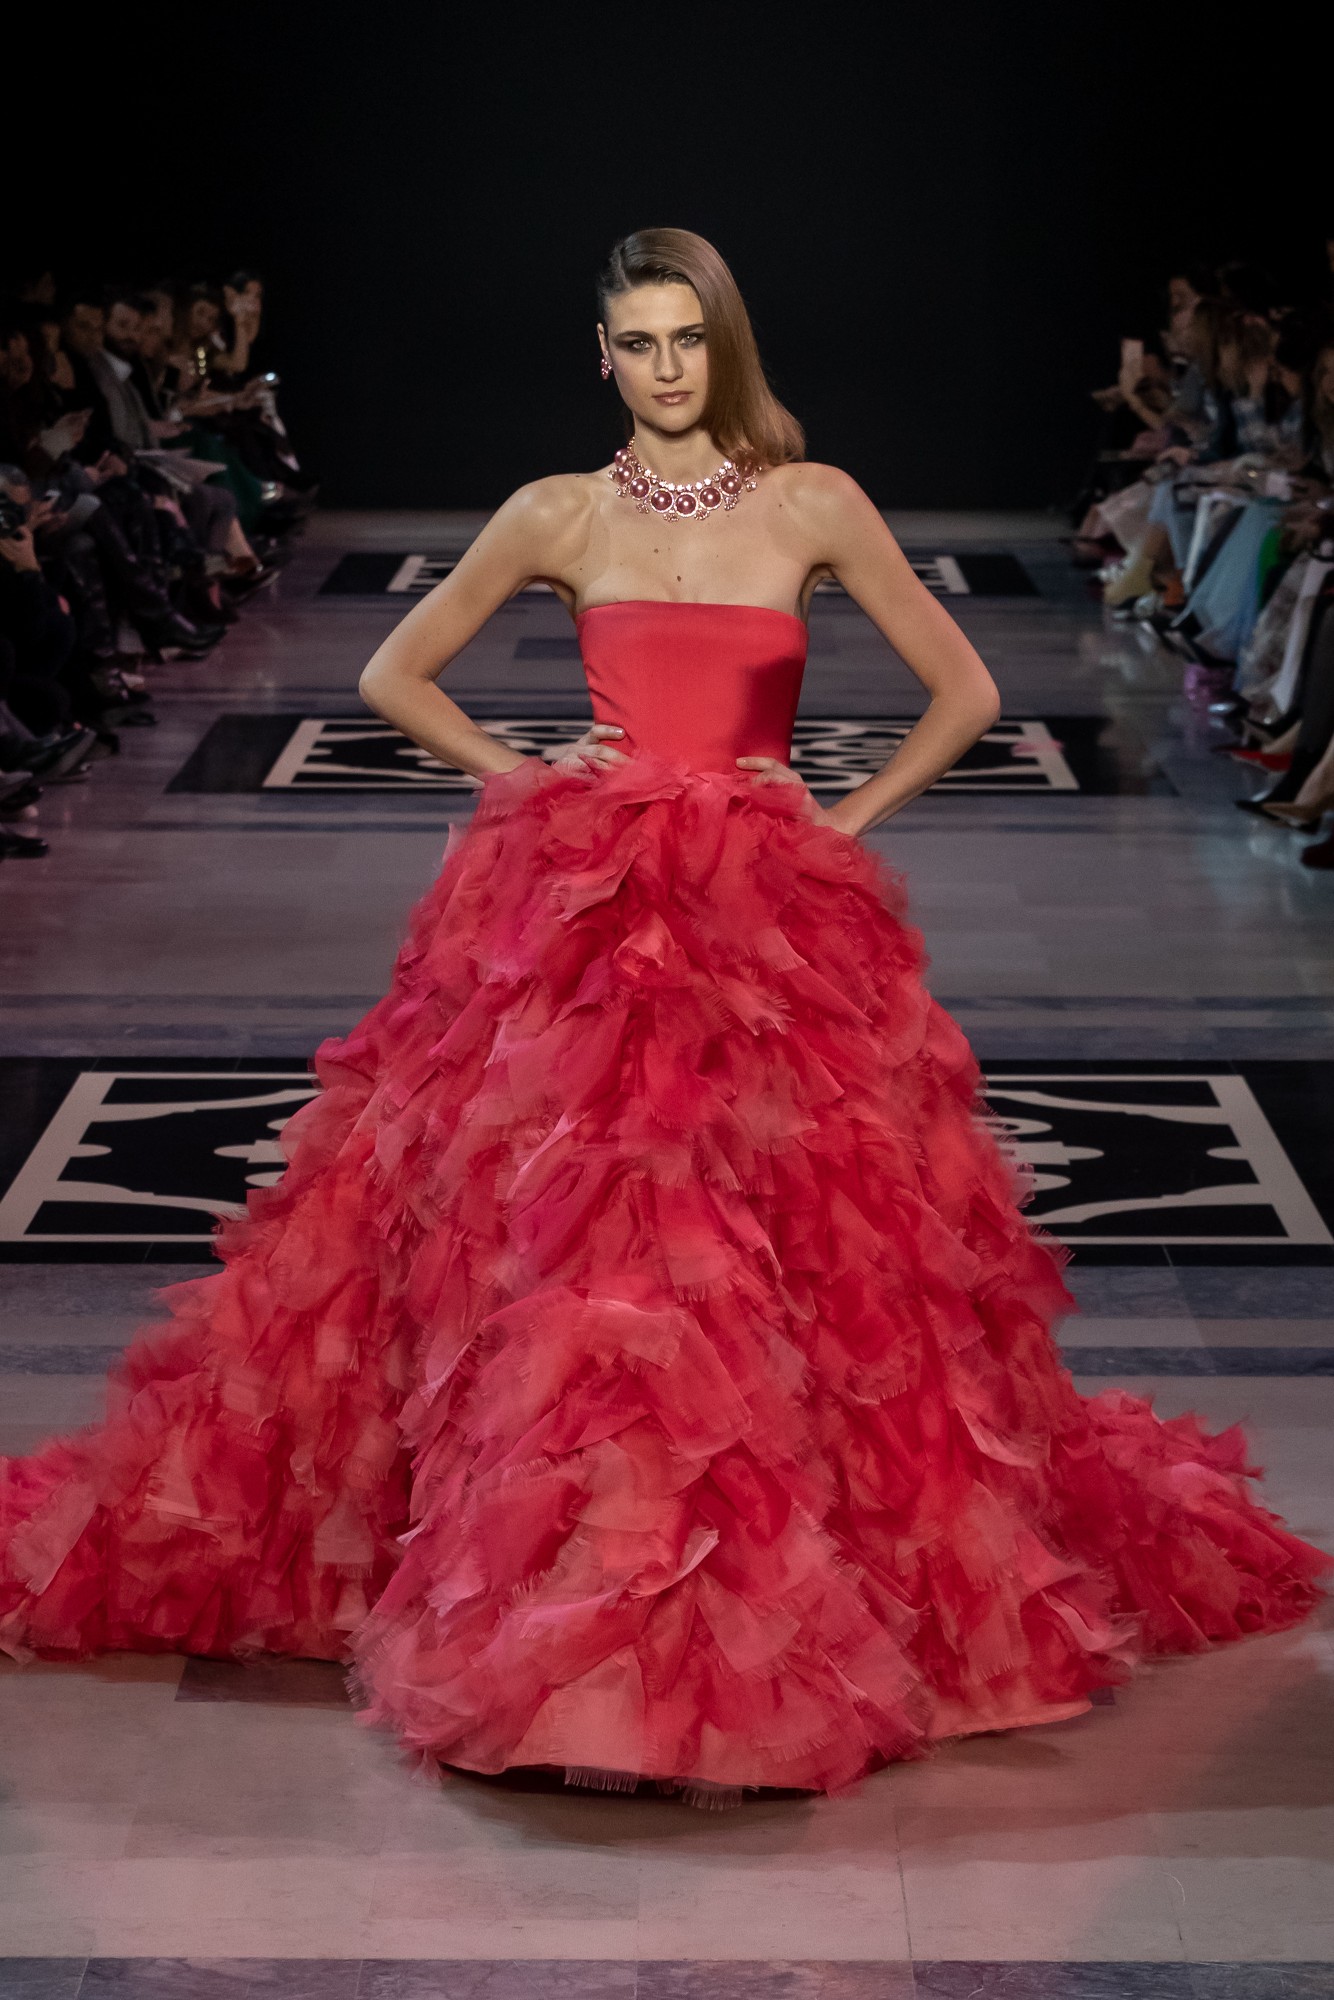 Spring 2019 Haute Couture: Georges Hobeika takes on Versailles ...